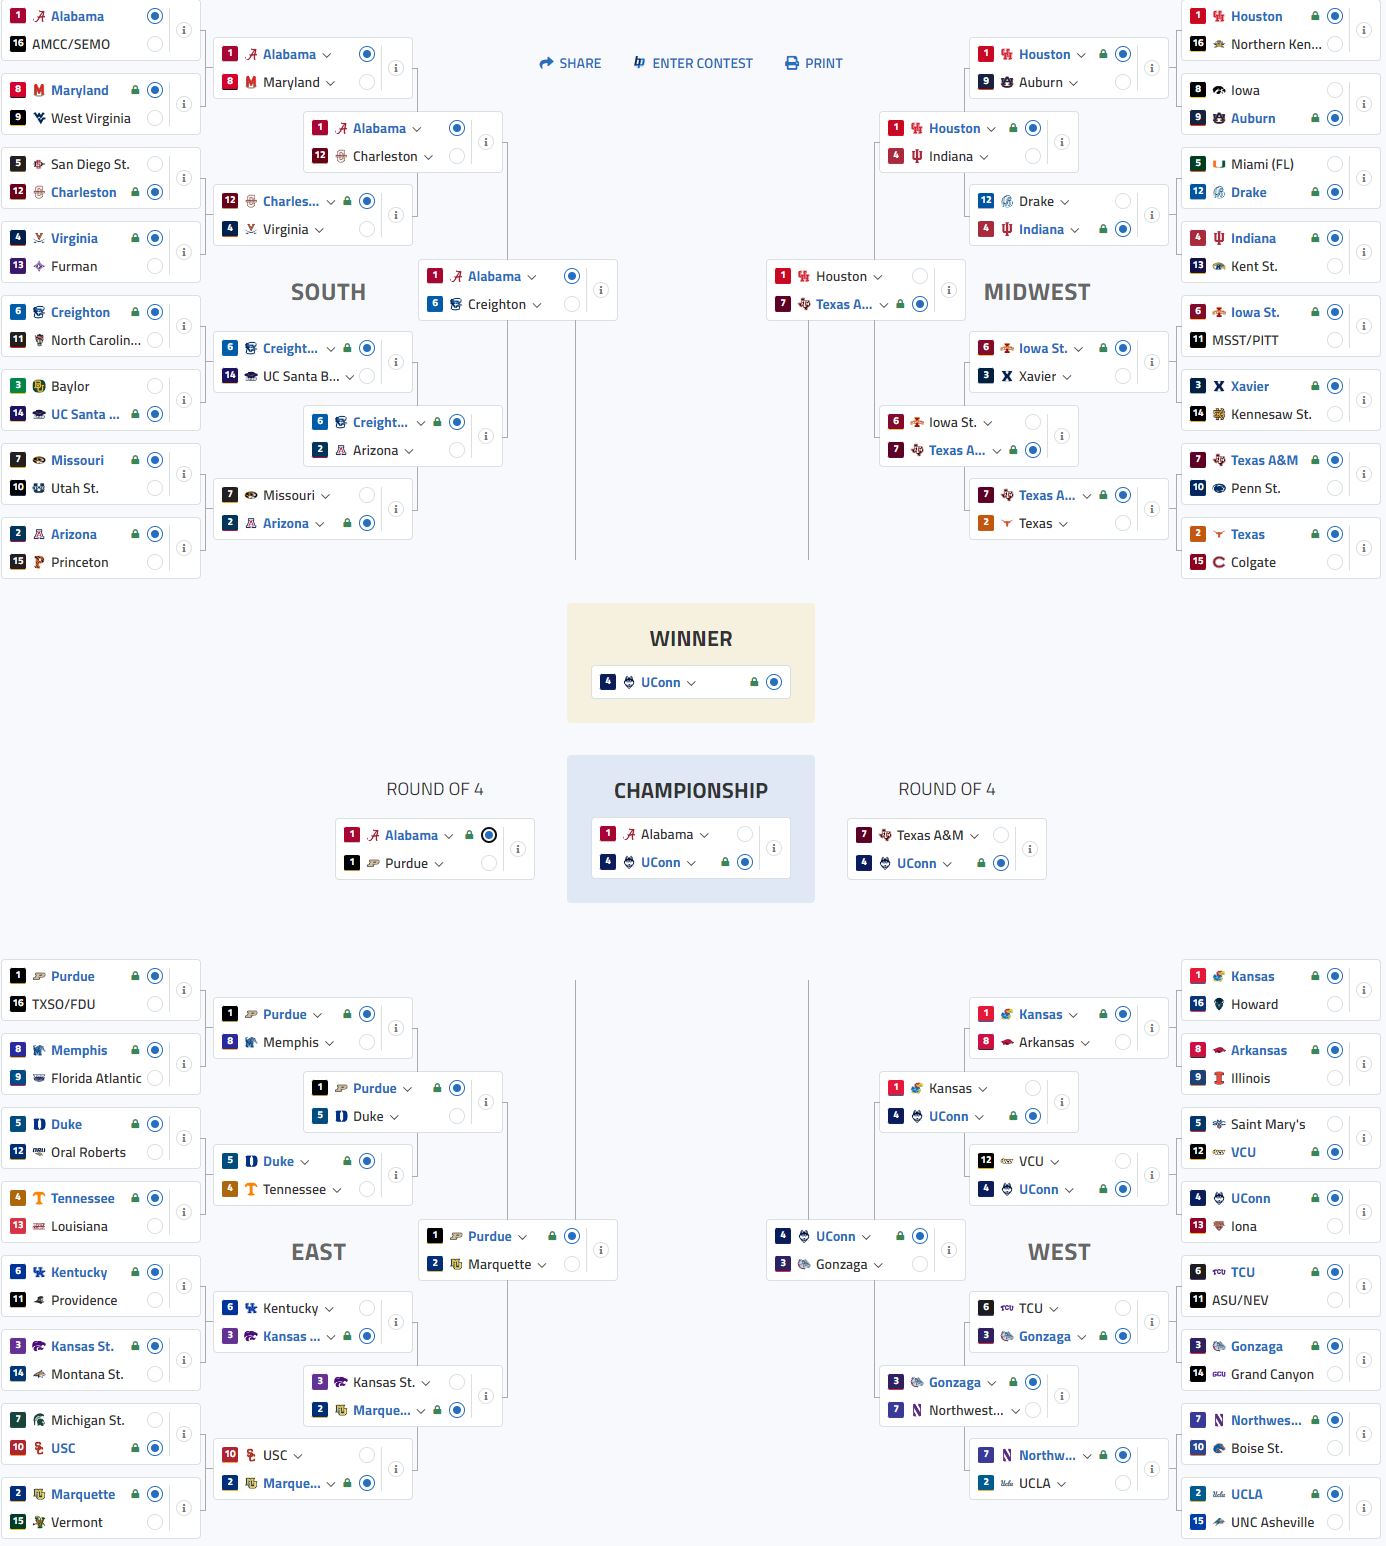 2023 March Madness Perfect Bracket Large Pools (NCAA Tournament